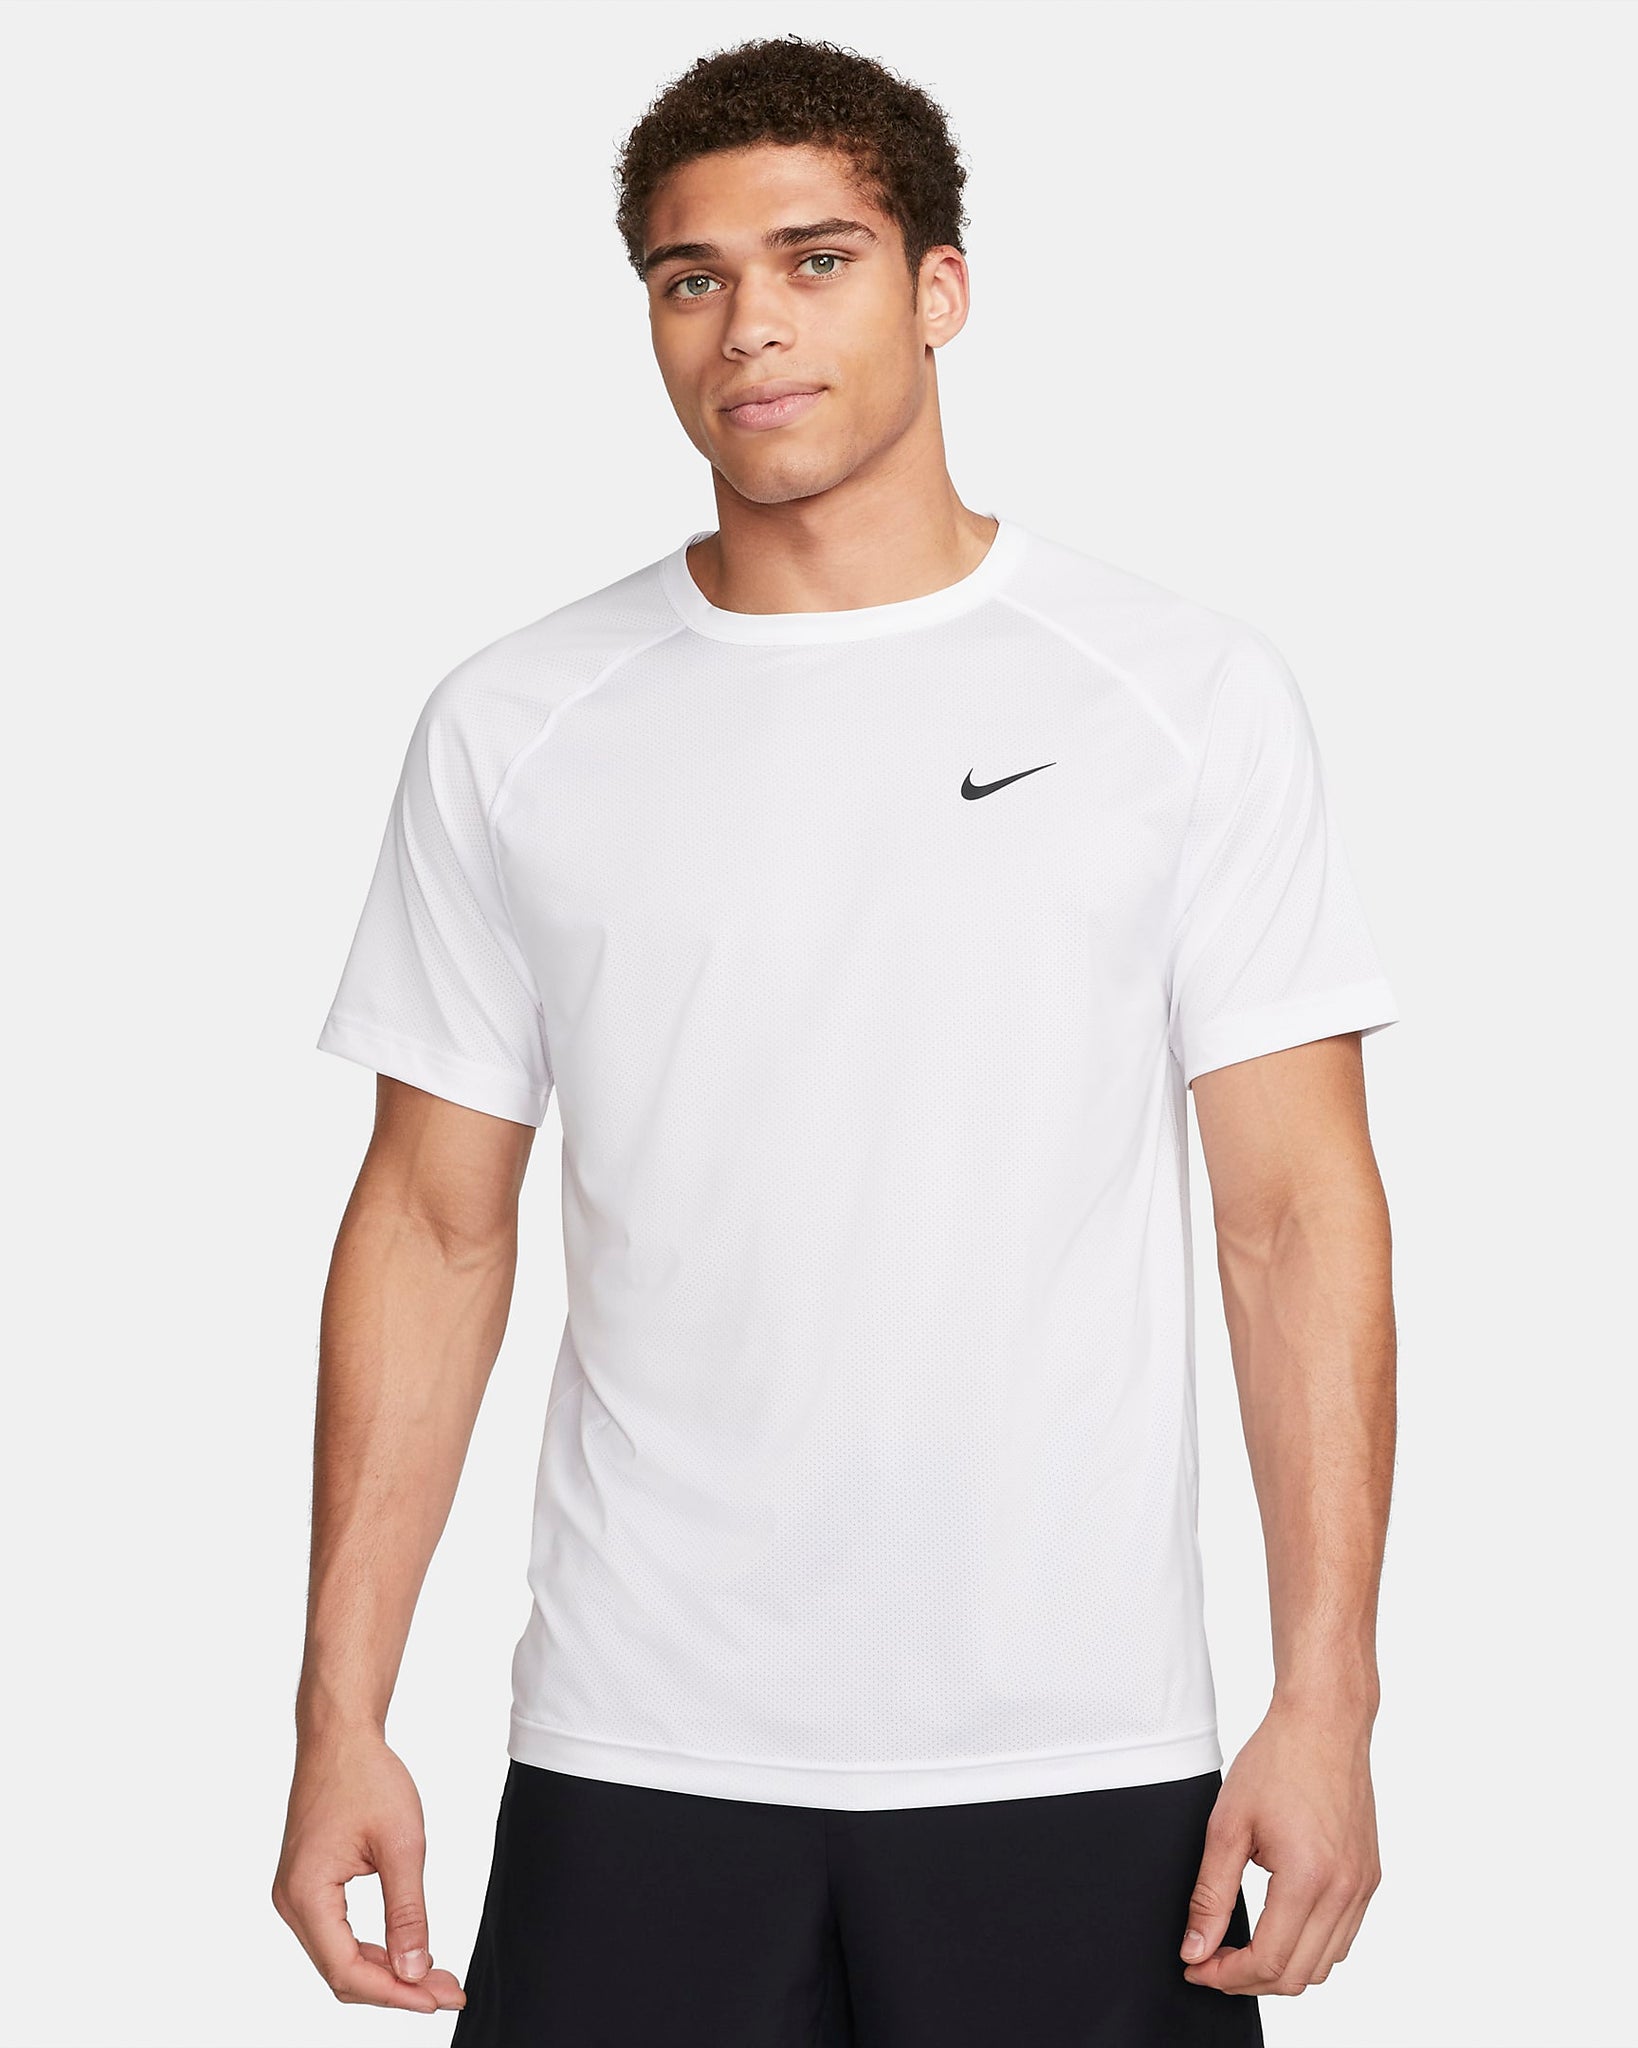 Nike Ready Dri-FIT short sleeve fitness top for men